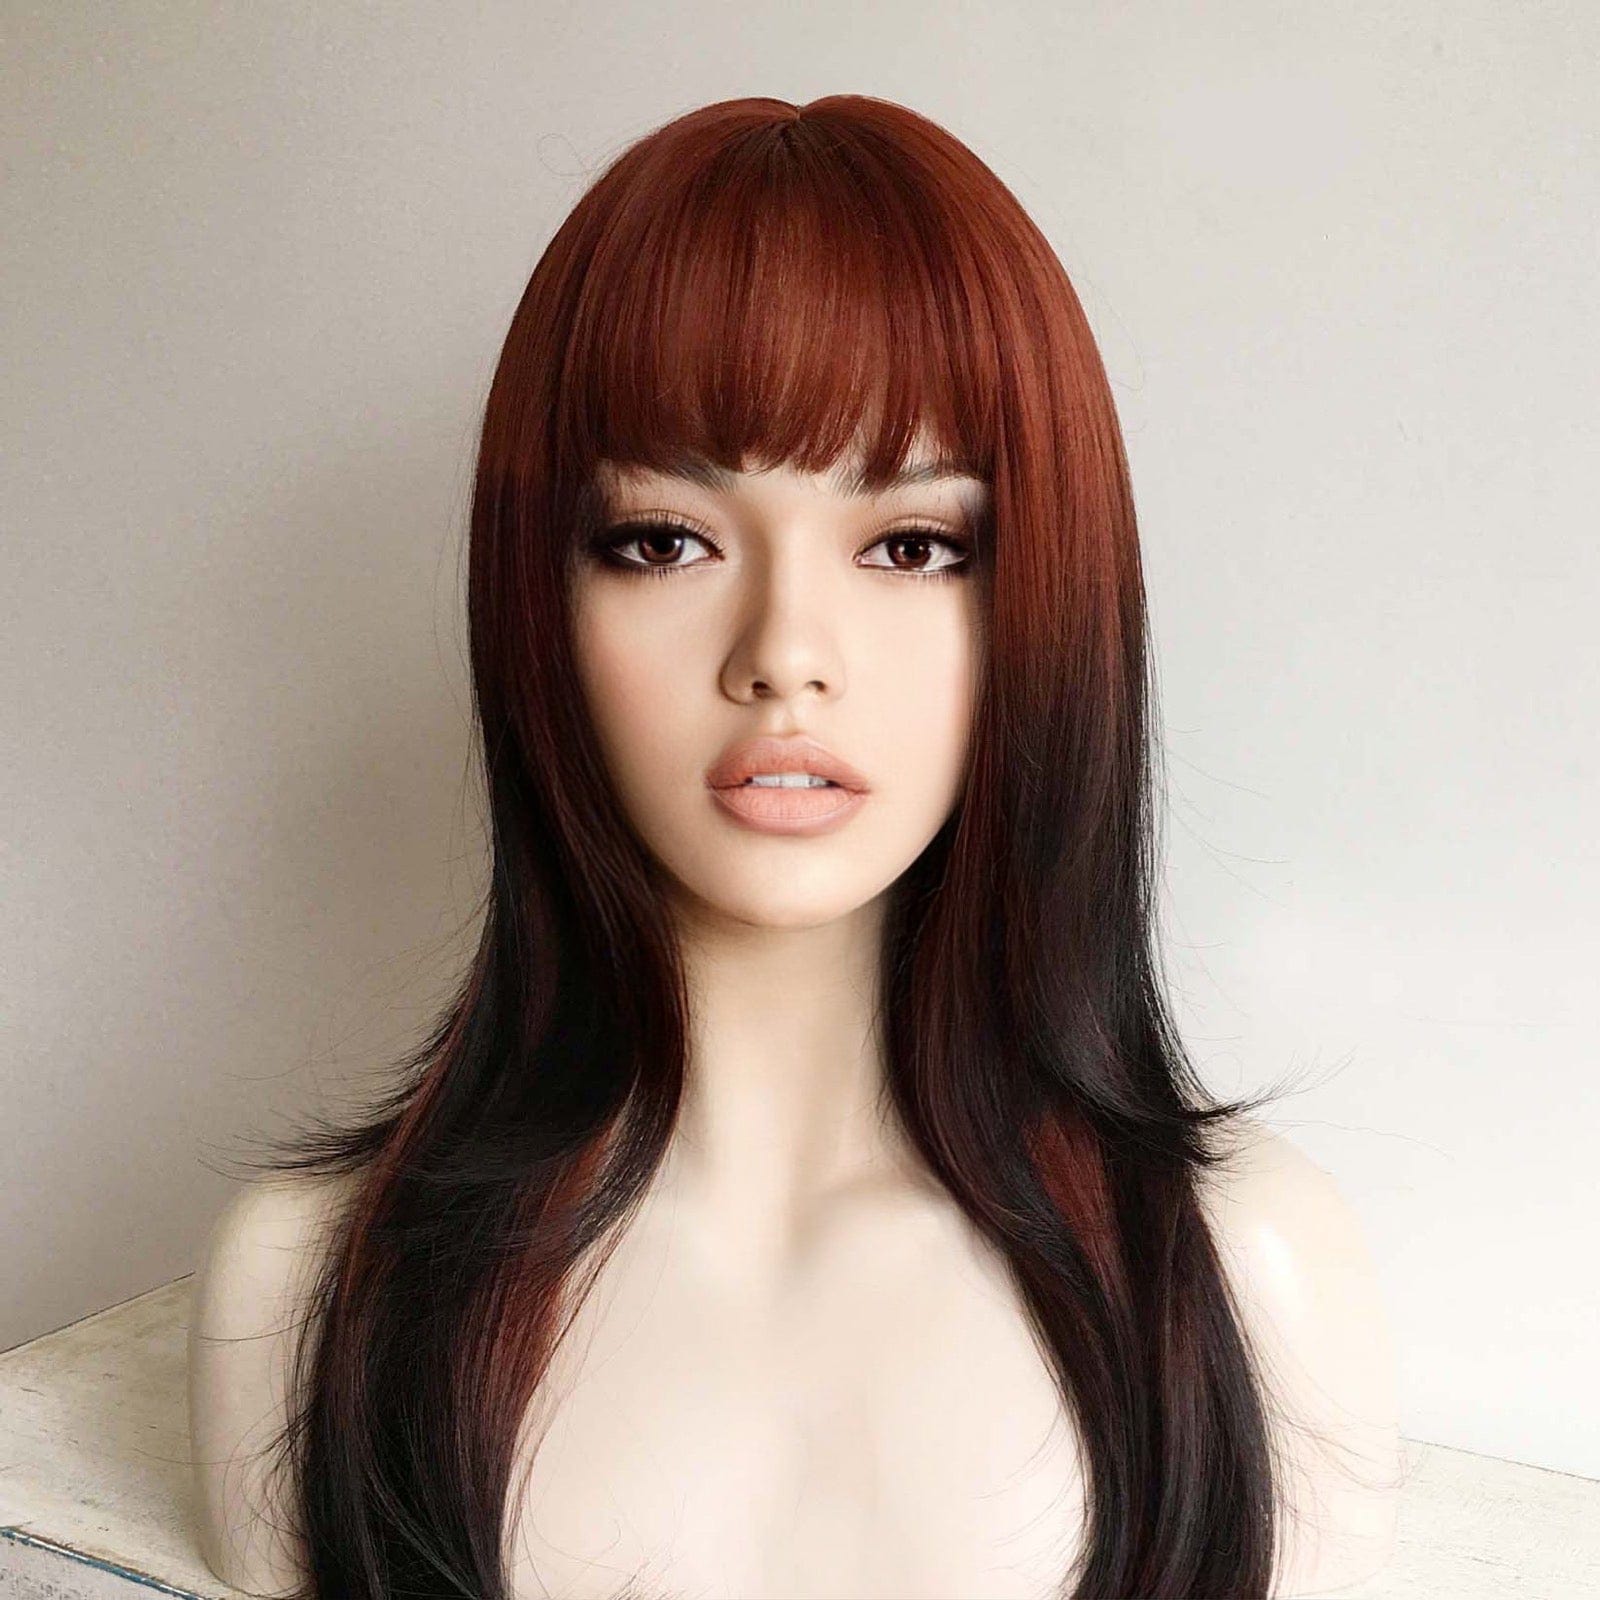 nevermindyrhead Red Wig Ombre Auburn And Black Long Straight Synthetic Women Bangs Wig